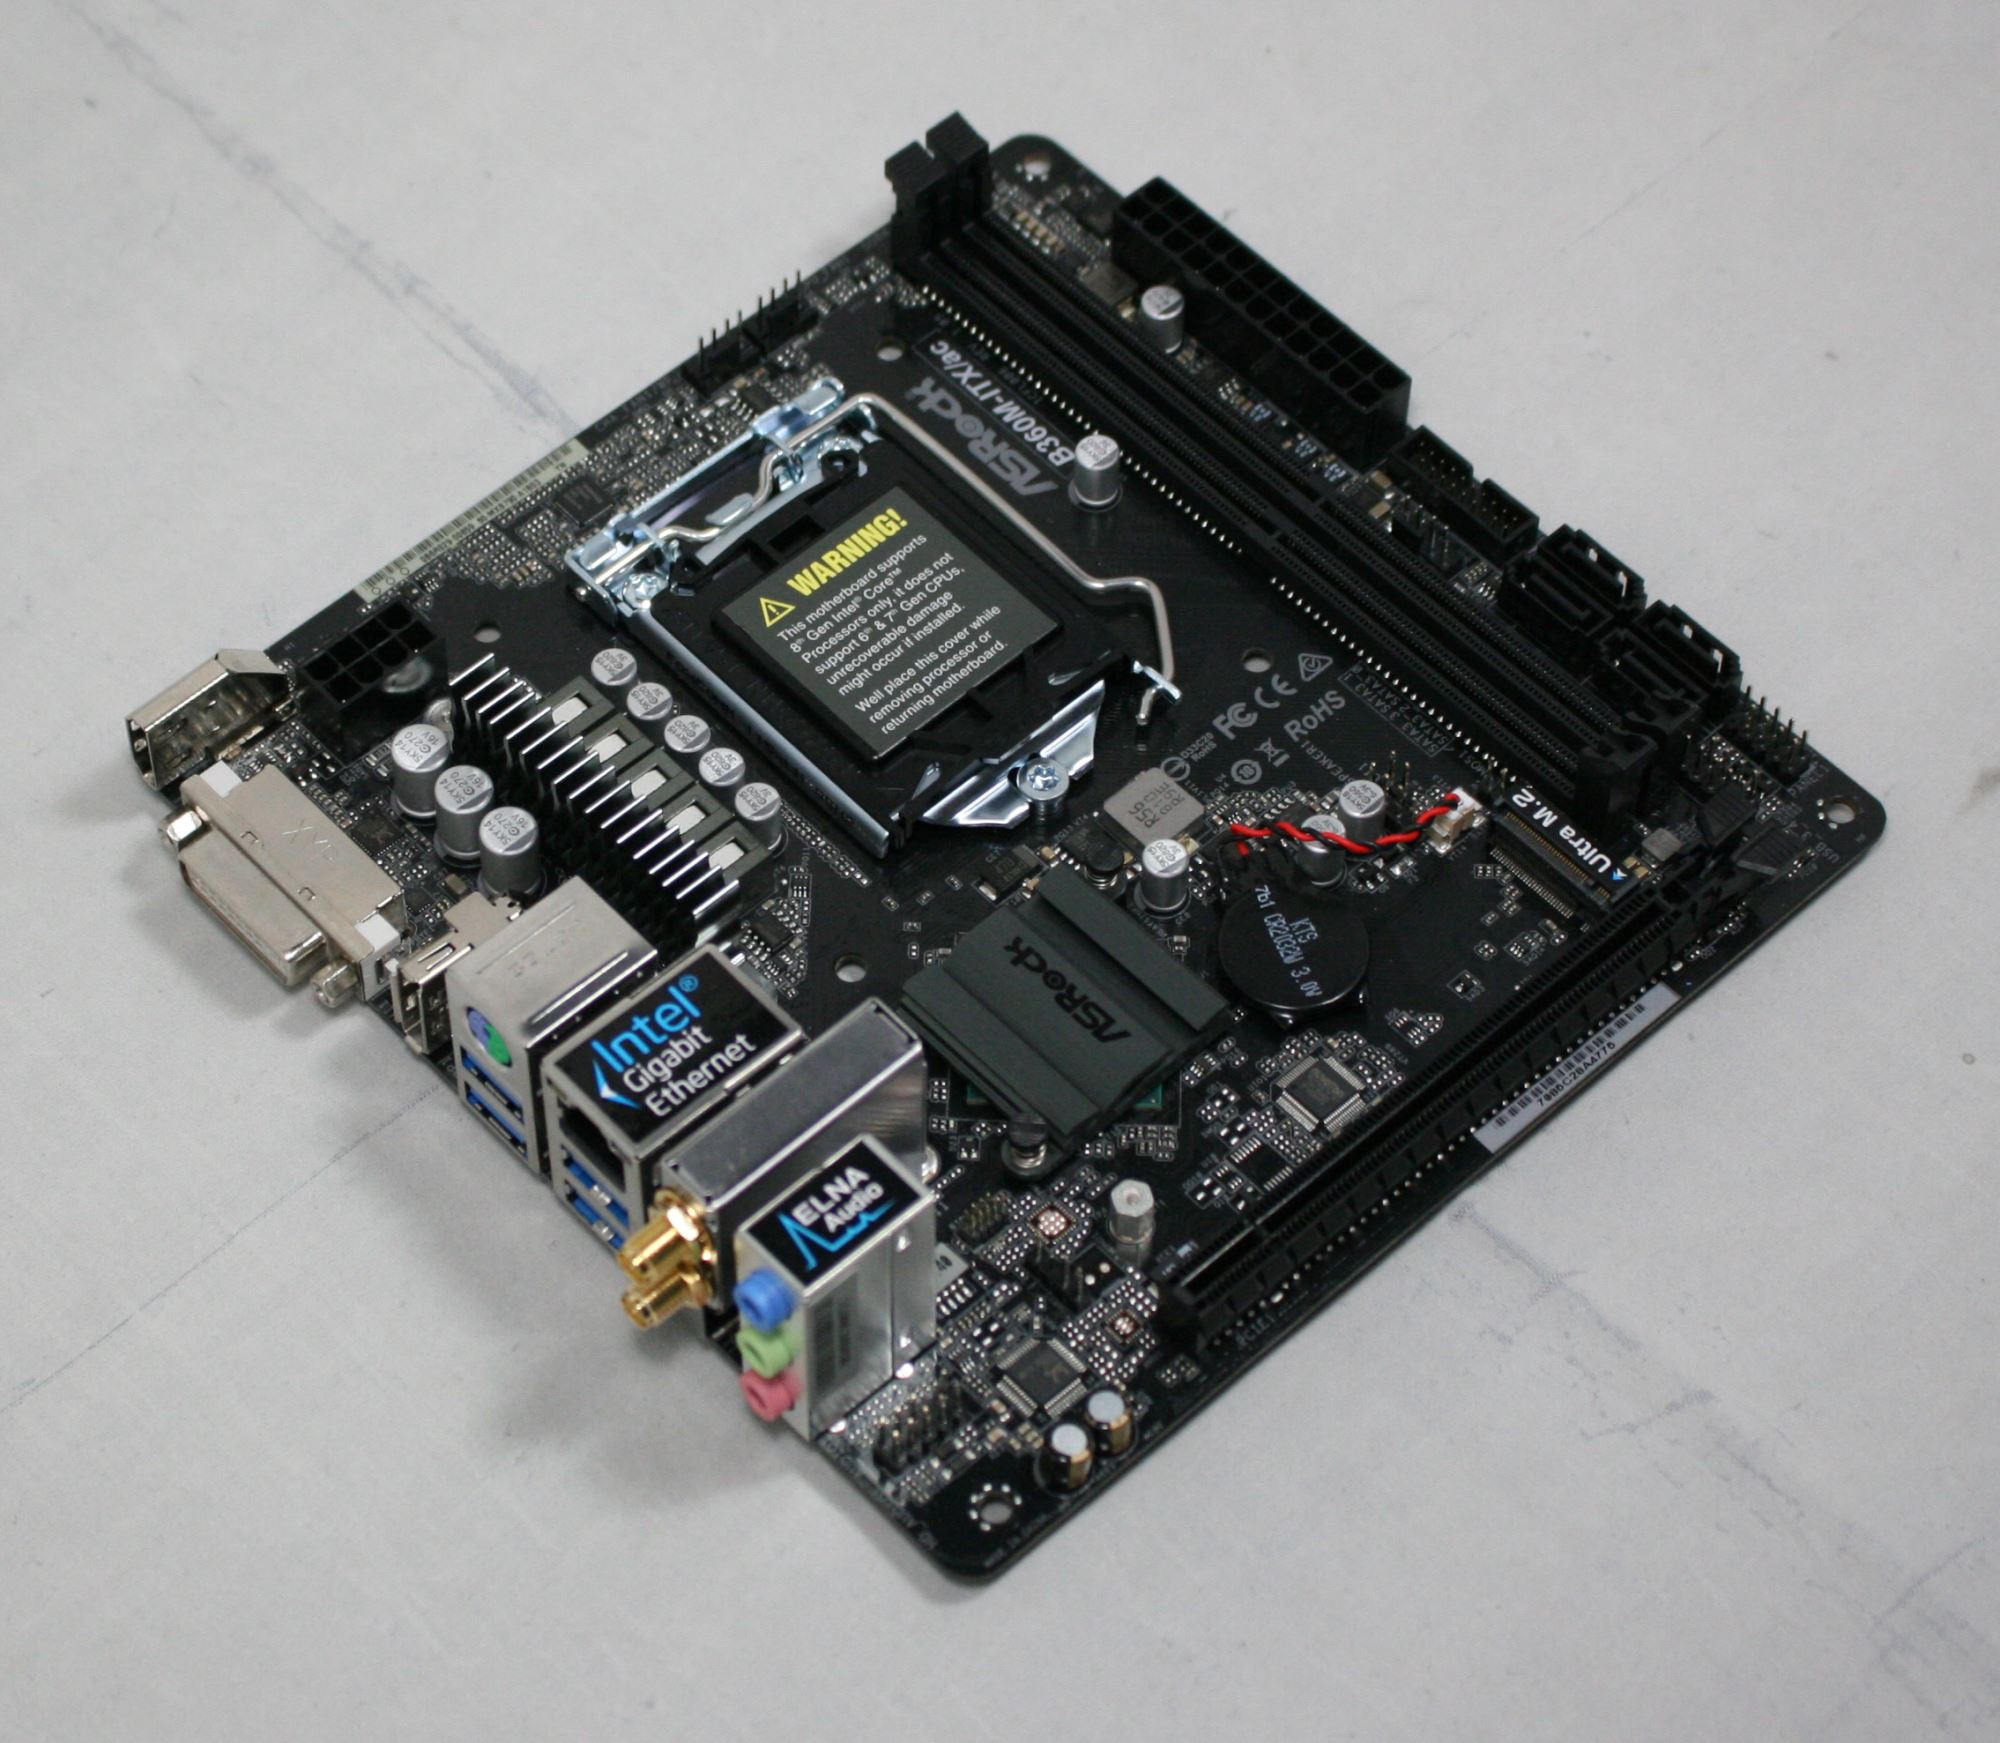 Visual Inspection - The ASRock B360M-ITX/ac Motherboard Review